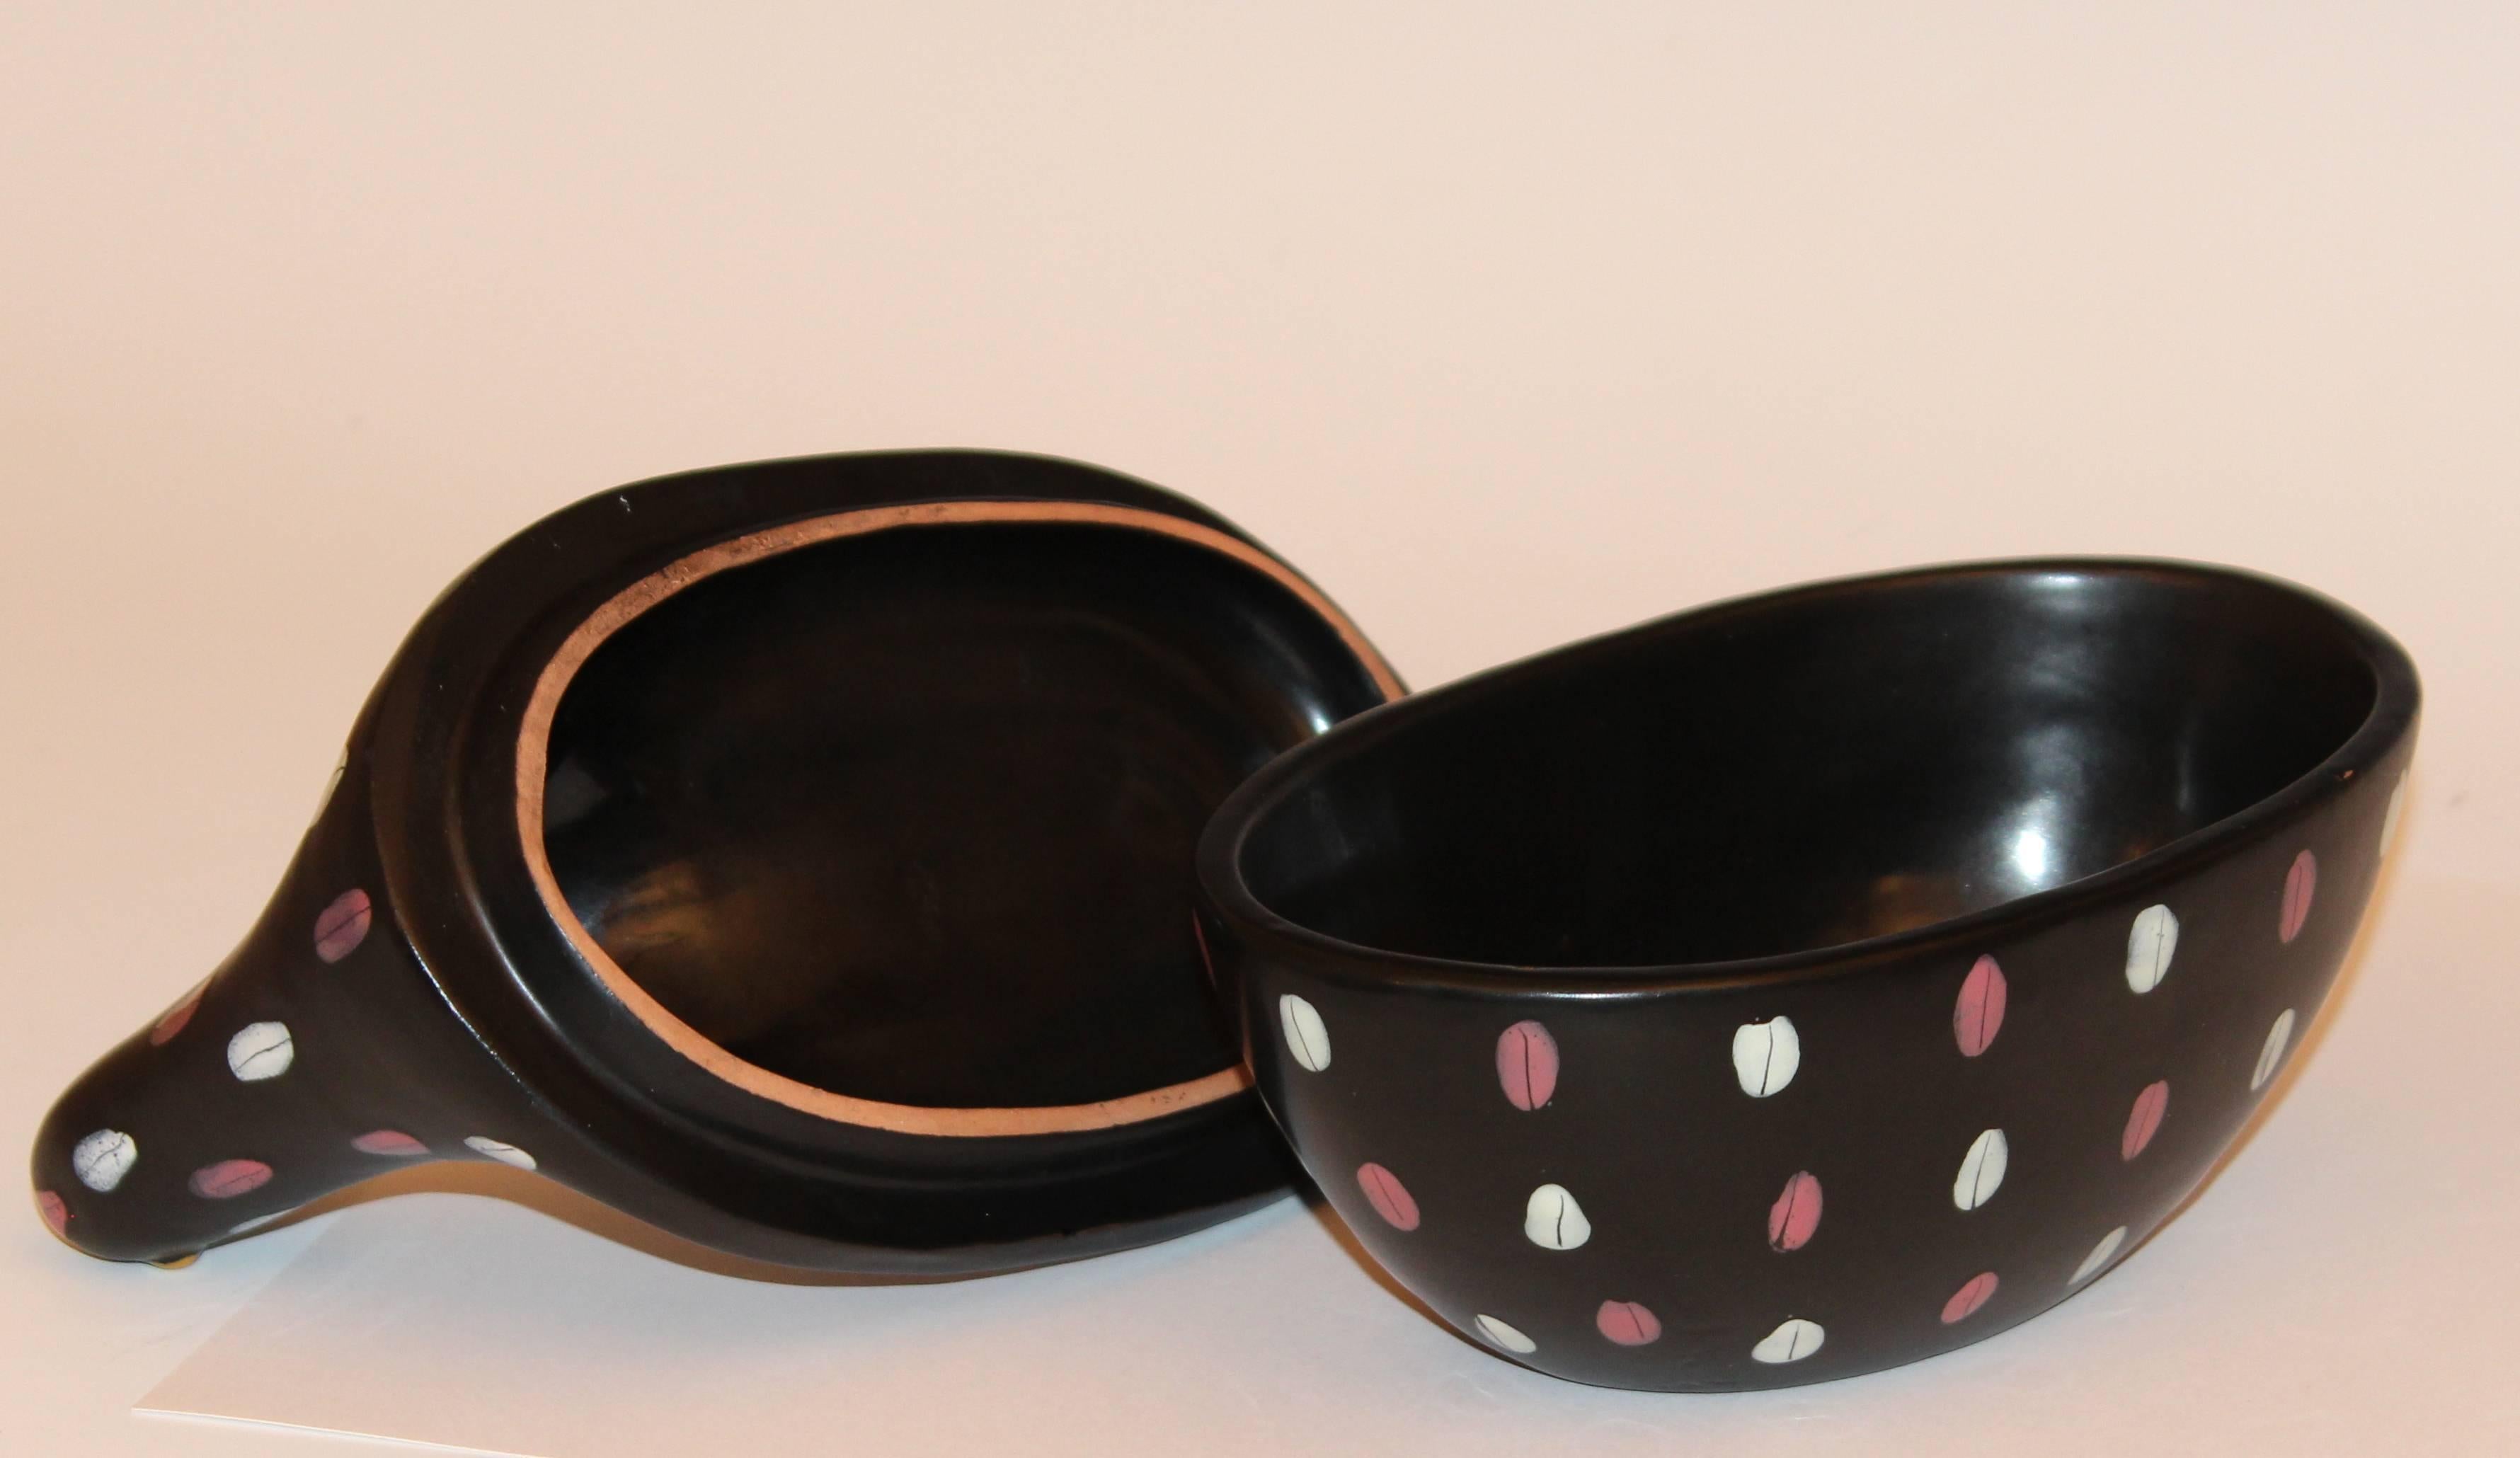 Whimsical Bitossi pottery duck form covered dish with bold polka dot glazes on a matt black ground, circa 1960's. 7